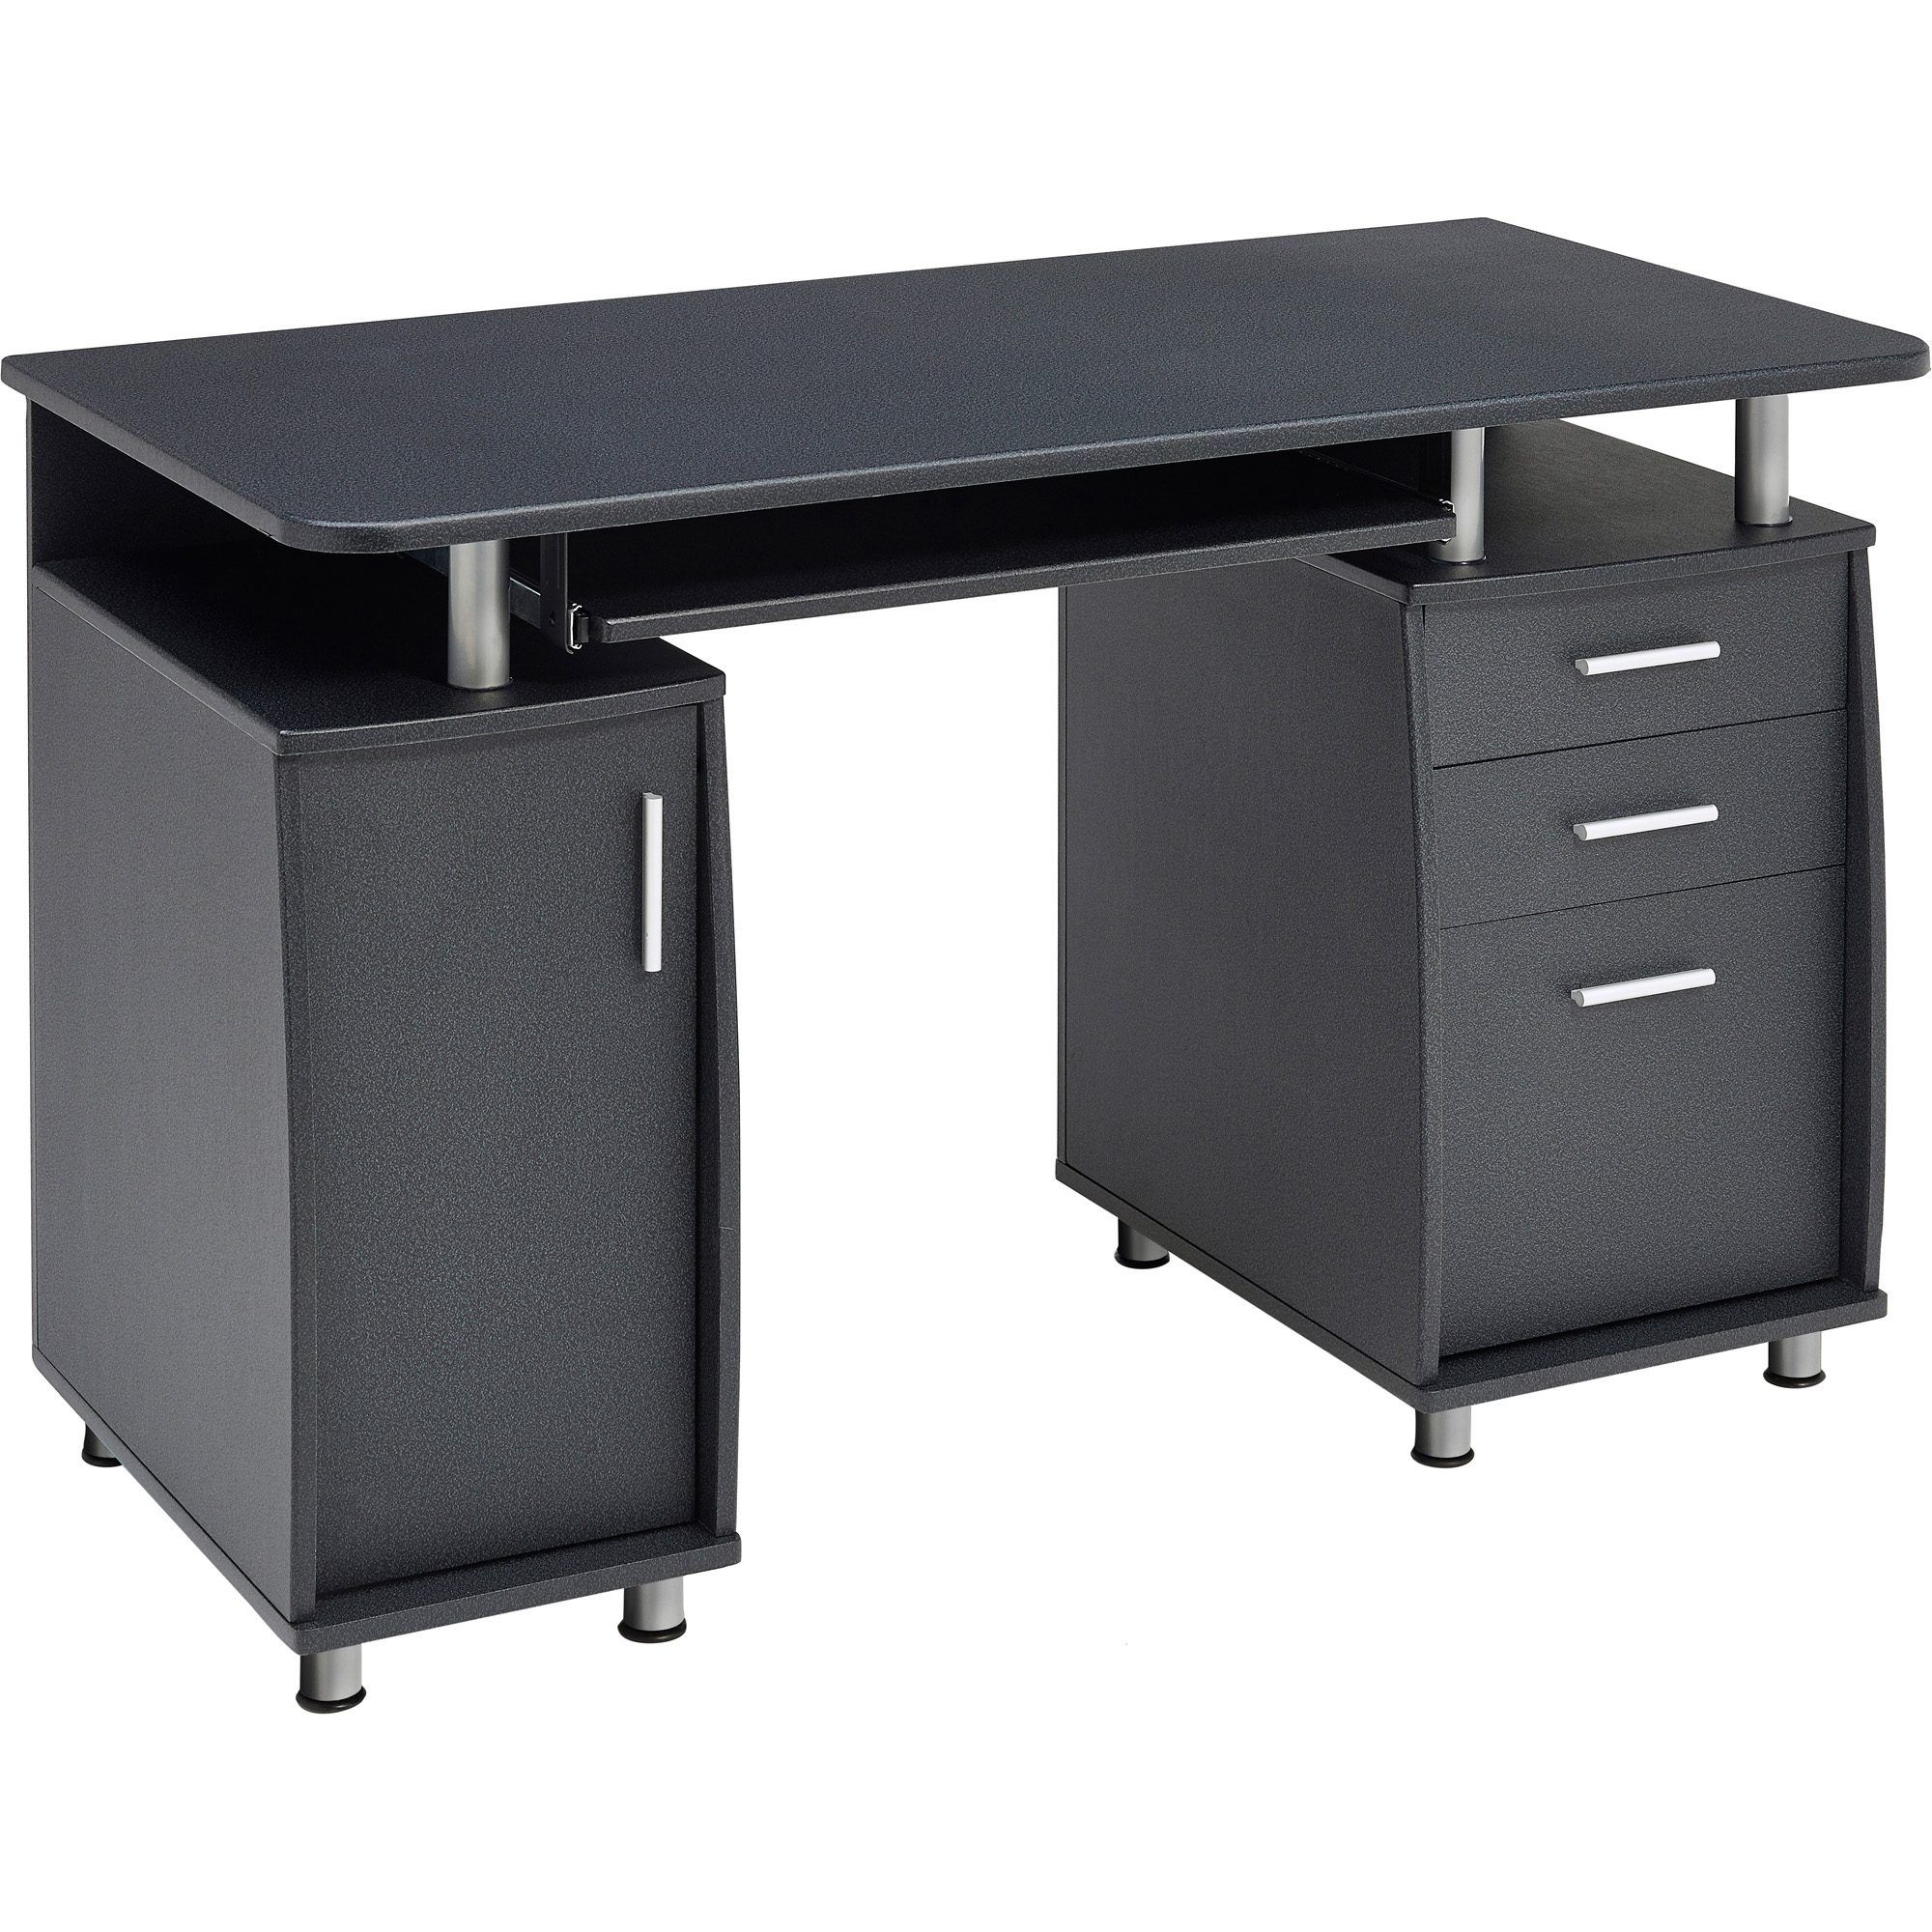 Emperor Desk With Cupboard & Drawers Graphite Black Intended For Graphite Convertible Desks With Keyboard Shelf (View 6 of 15)